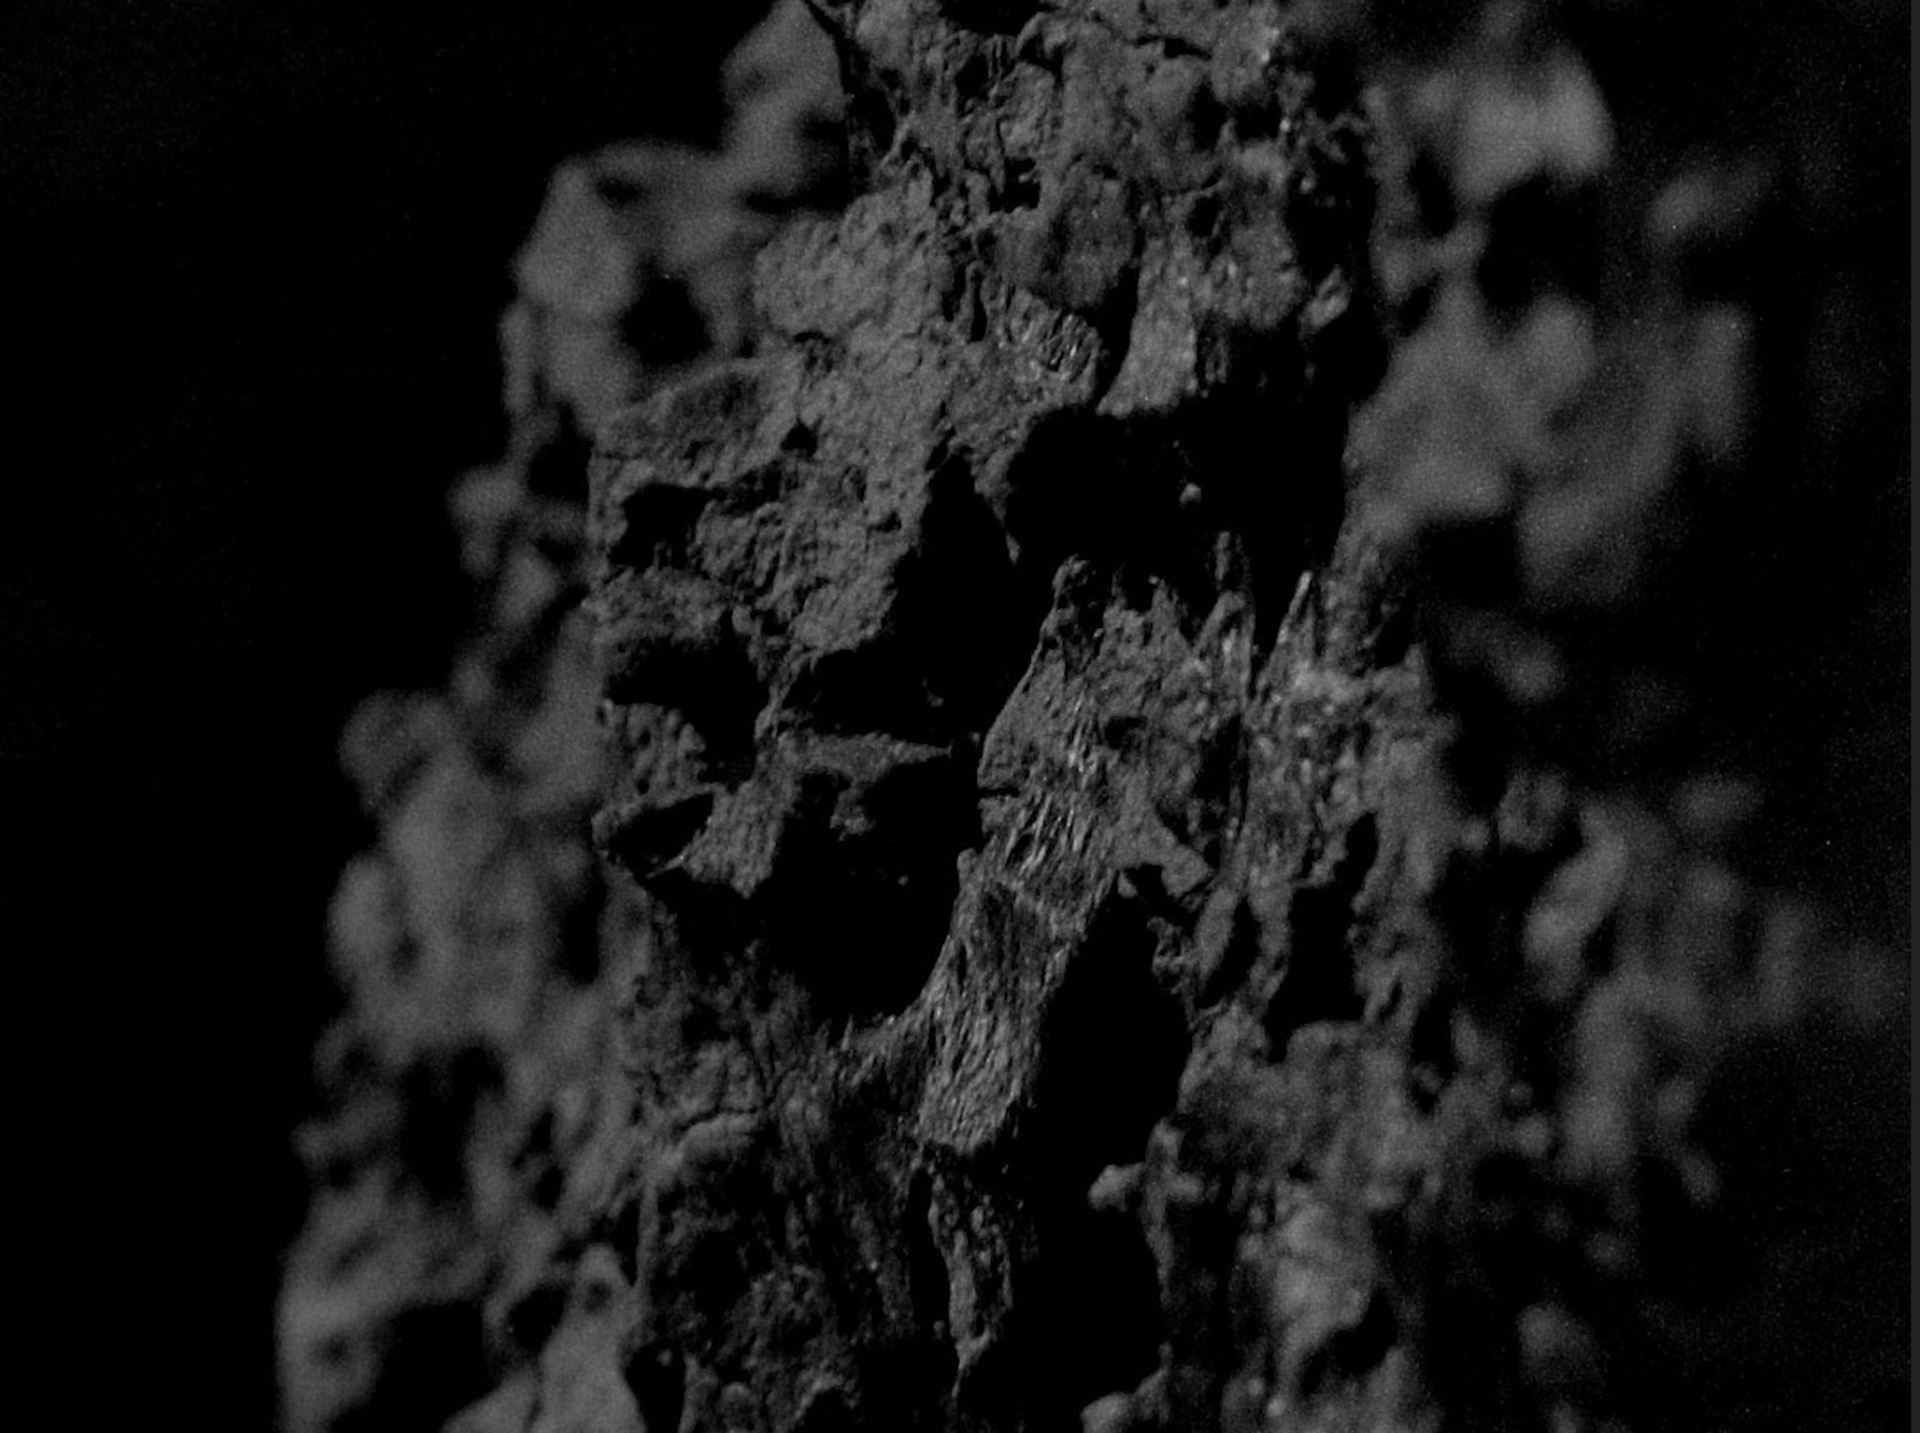 A close-up film still of the texture of a rocky surface.